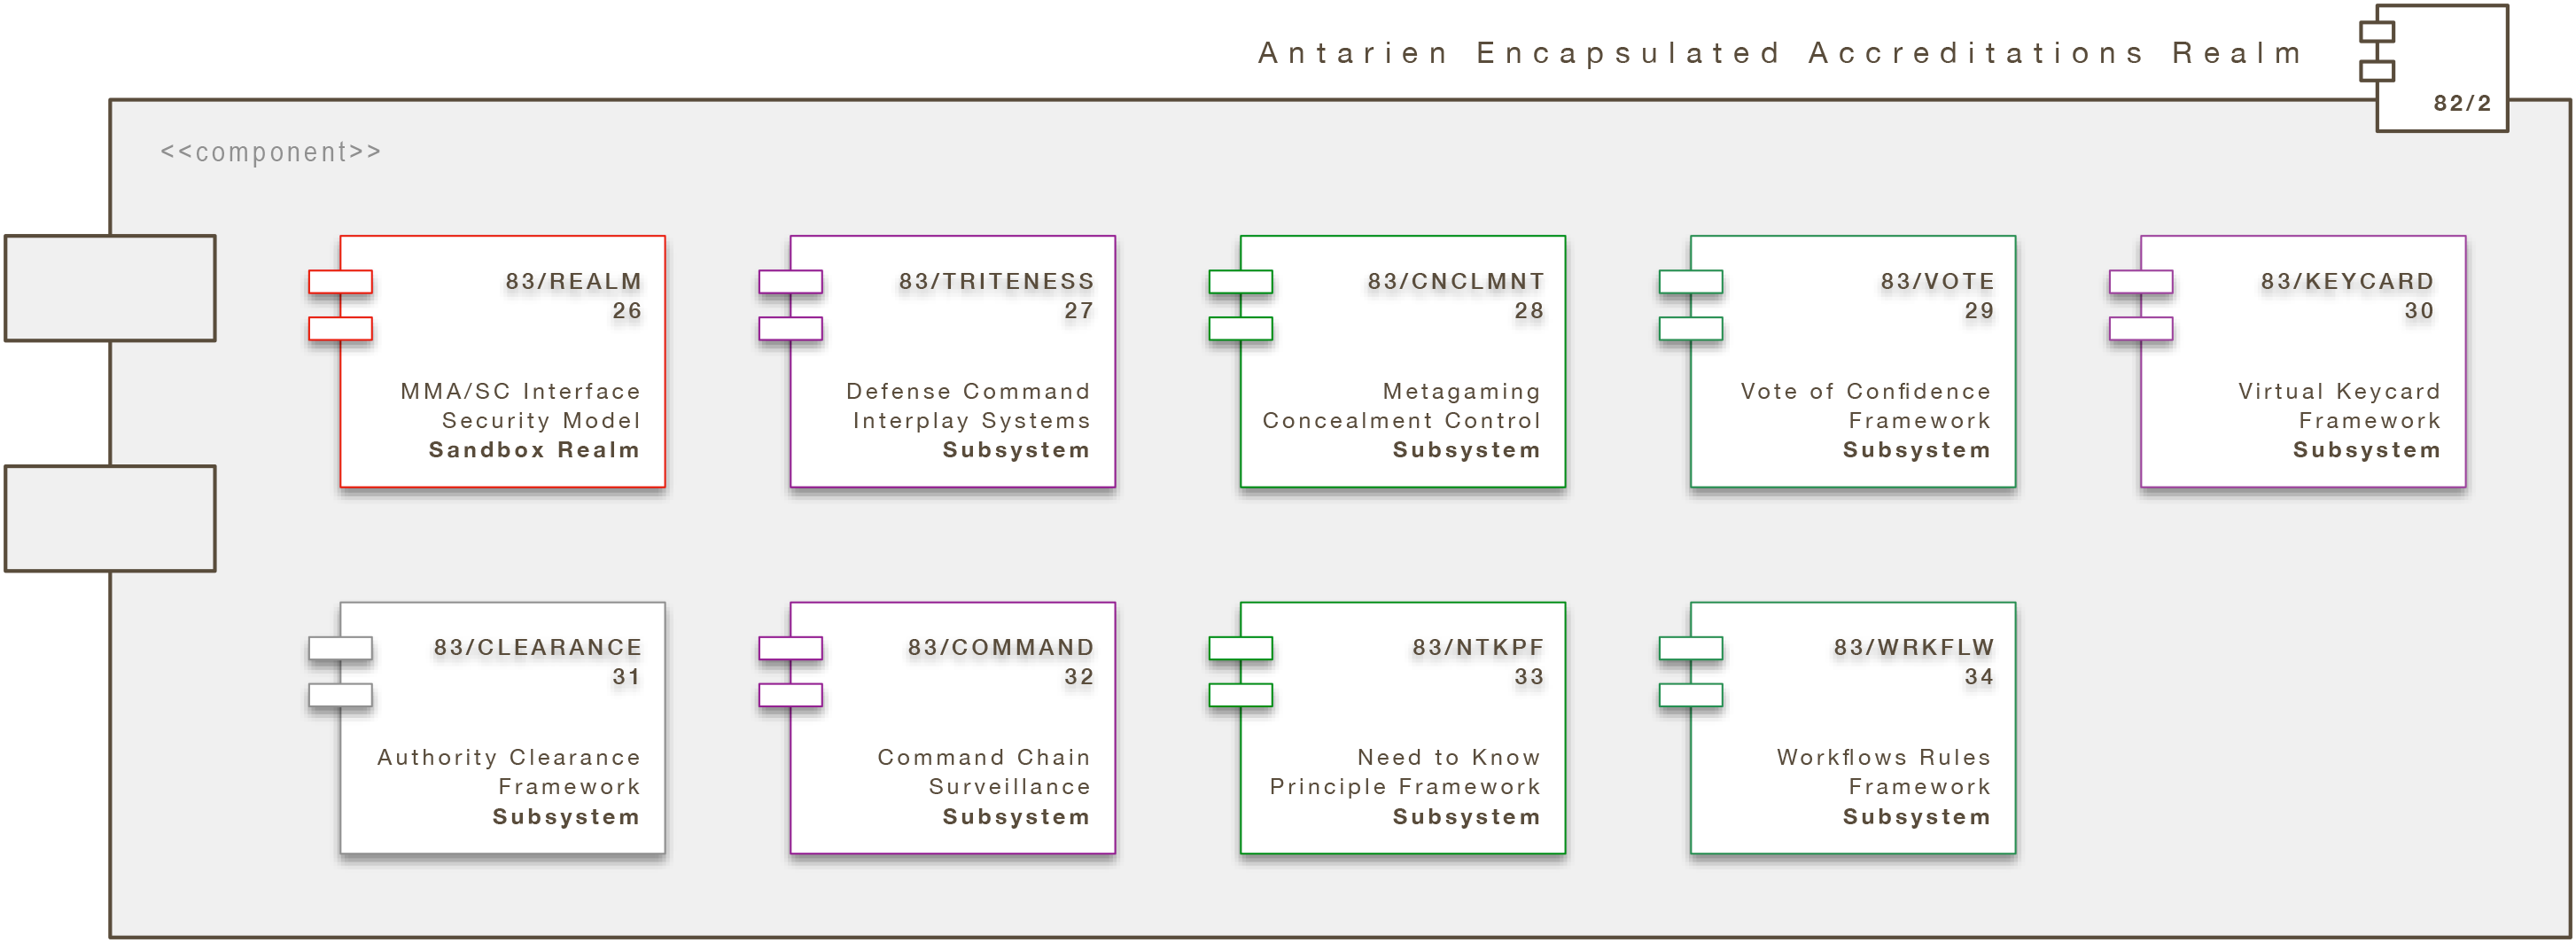 Core Engine Modul: Antarien Encapsulated Accreditations Realm (A/EAR)